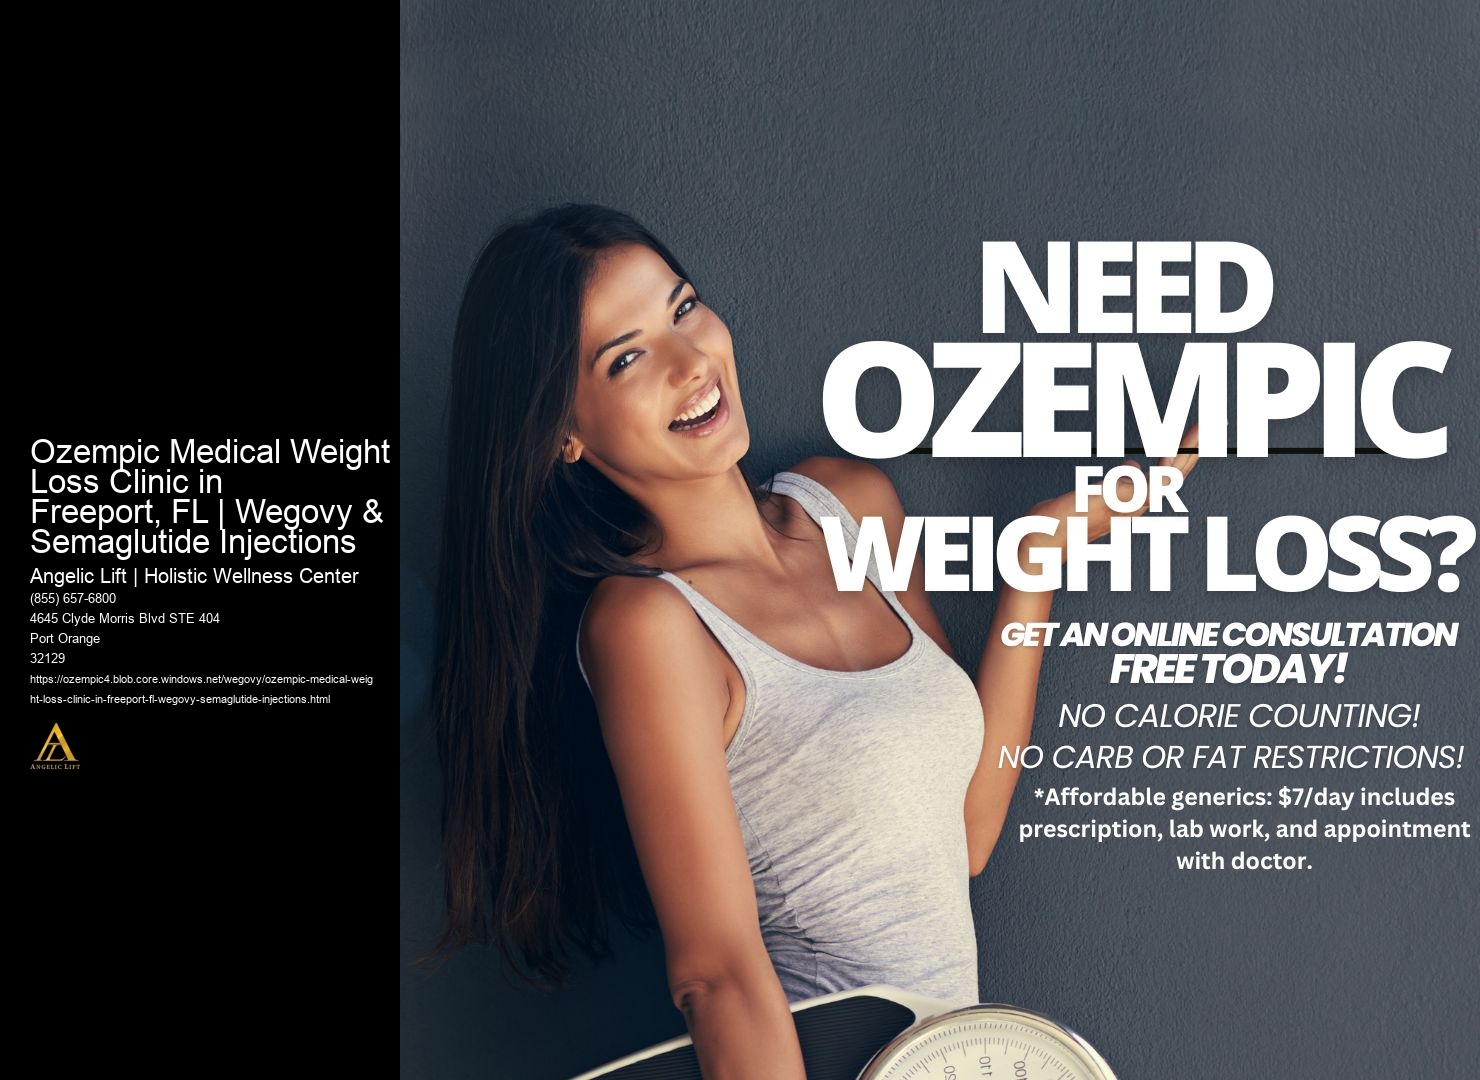 Ozempic Medical Weight Loss Clinic in Freeport, FL | Wegovy & Semaglutide Injections